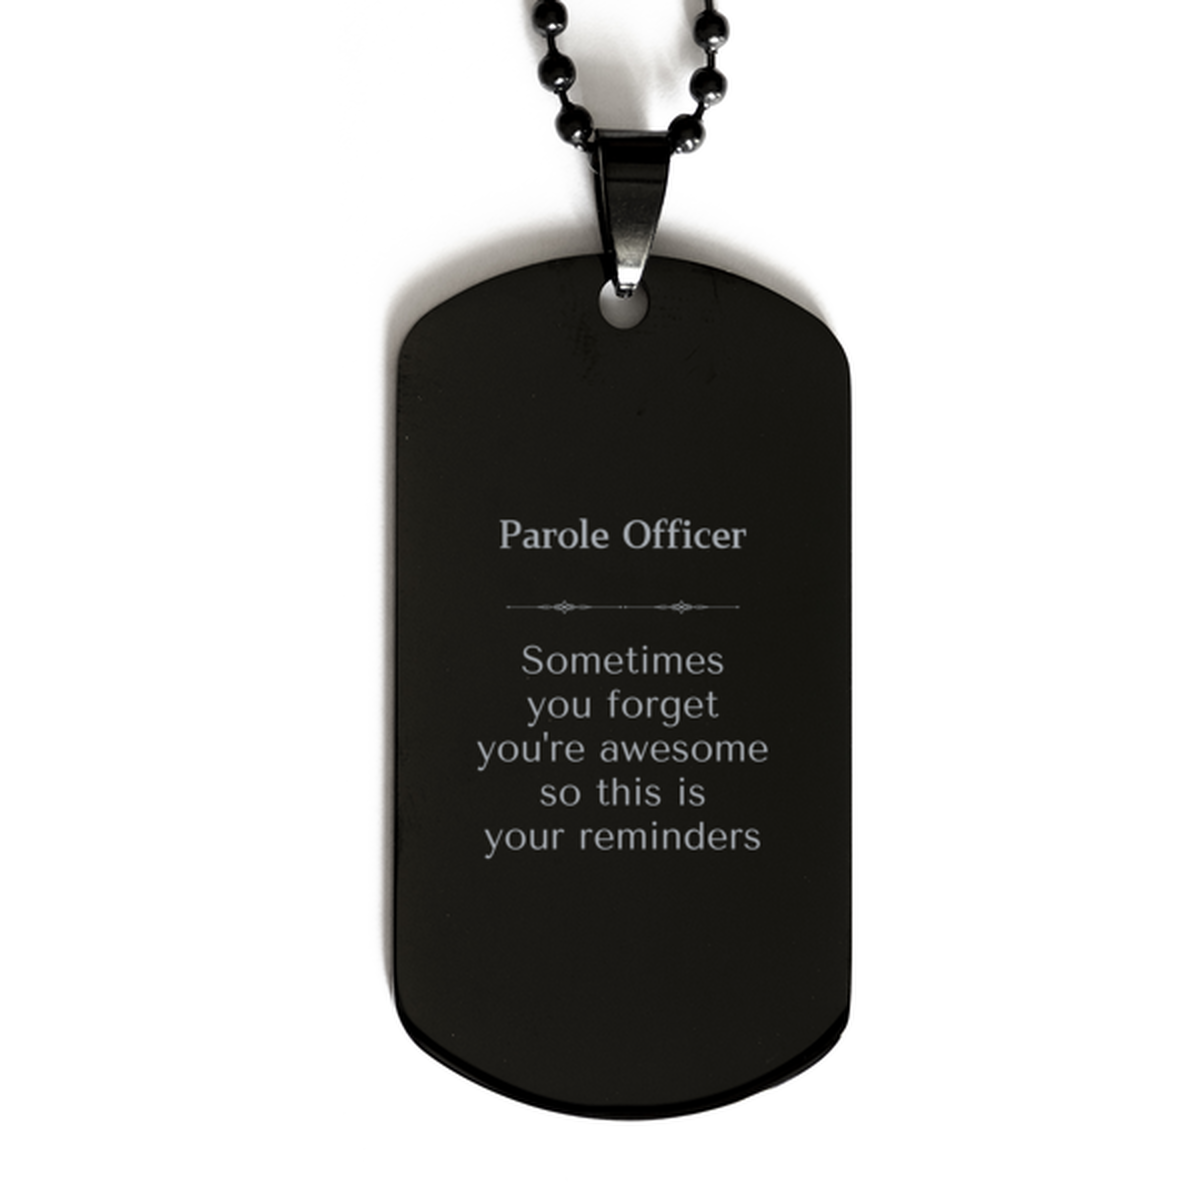 Sentimental Parole Officer Black Dog Tag, Parole Officer Sometimes you forget you're awesome so this is your reminders, Graduation Christmas Birthday Gifts for Parole Officer, Men, Women, Coworkers